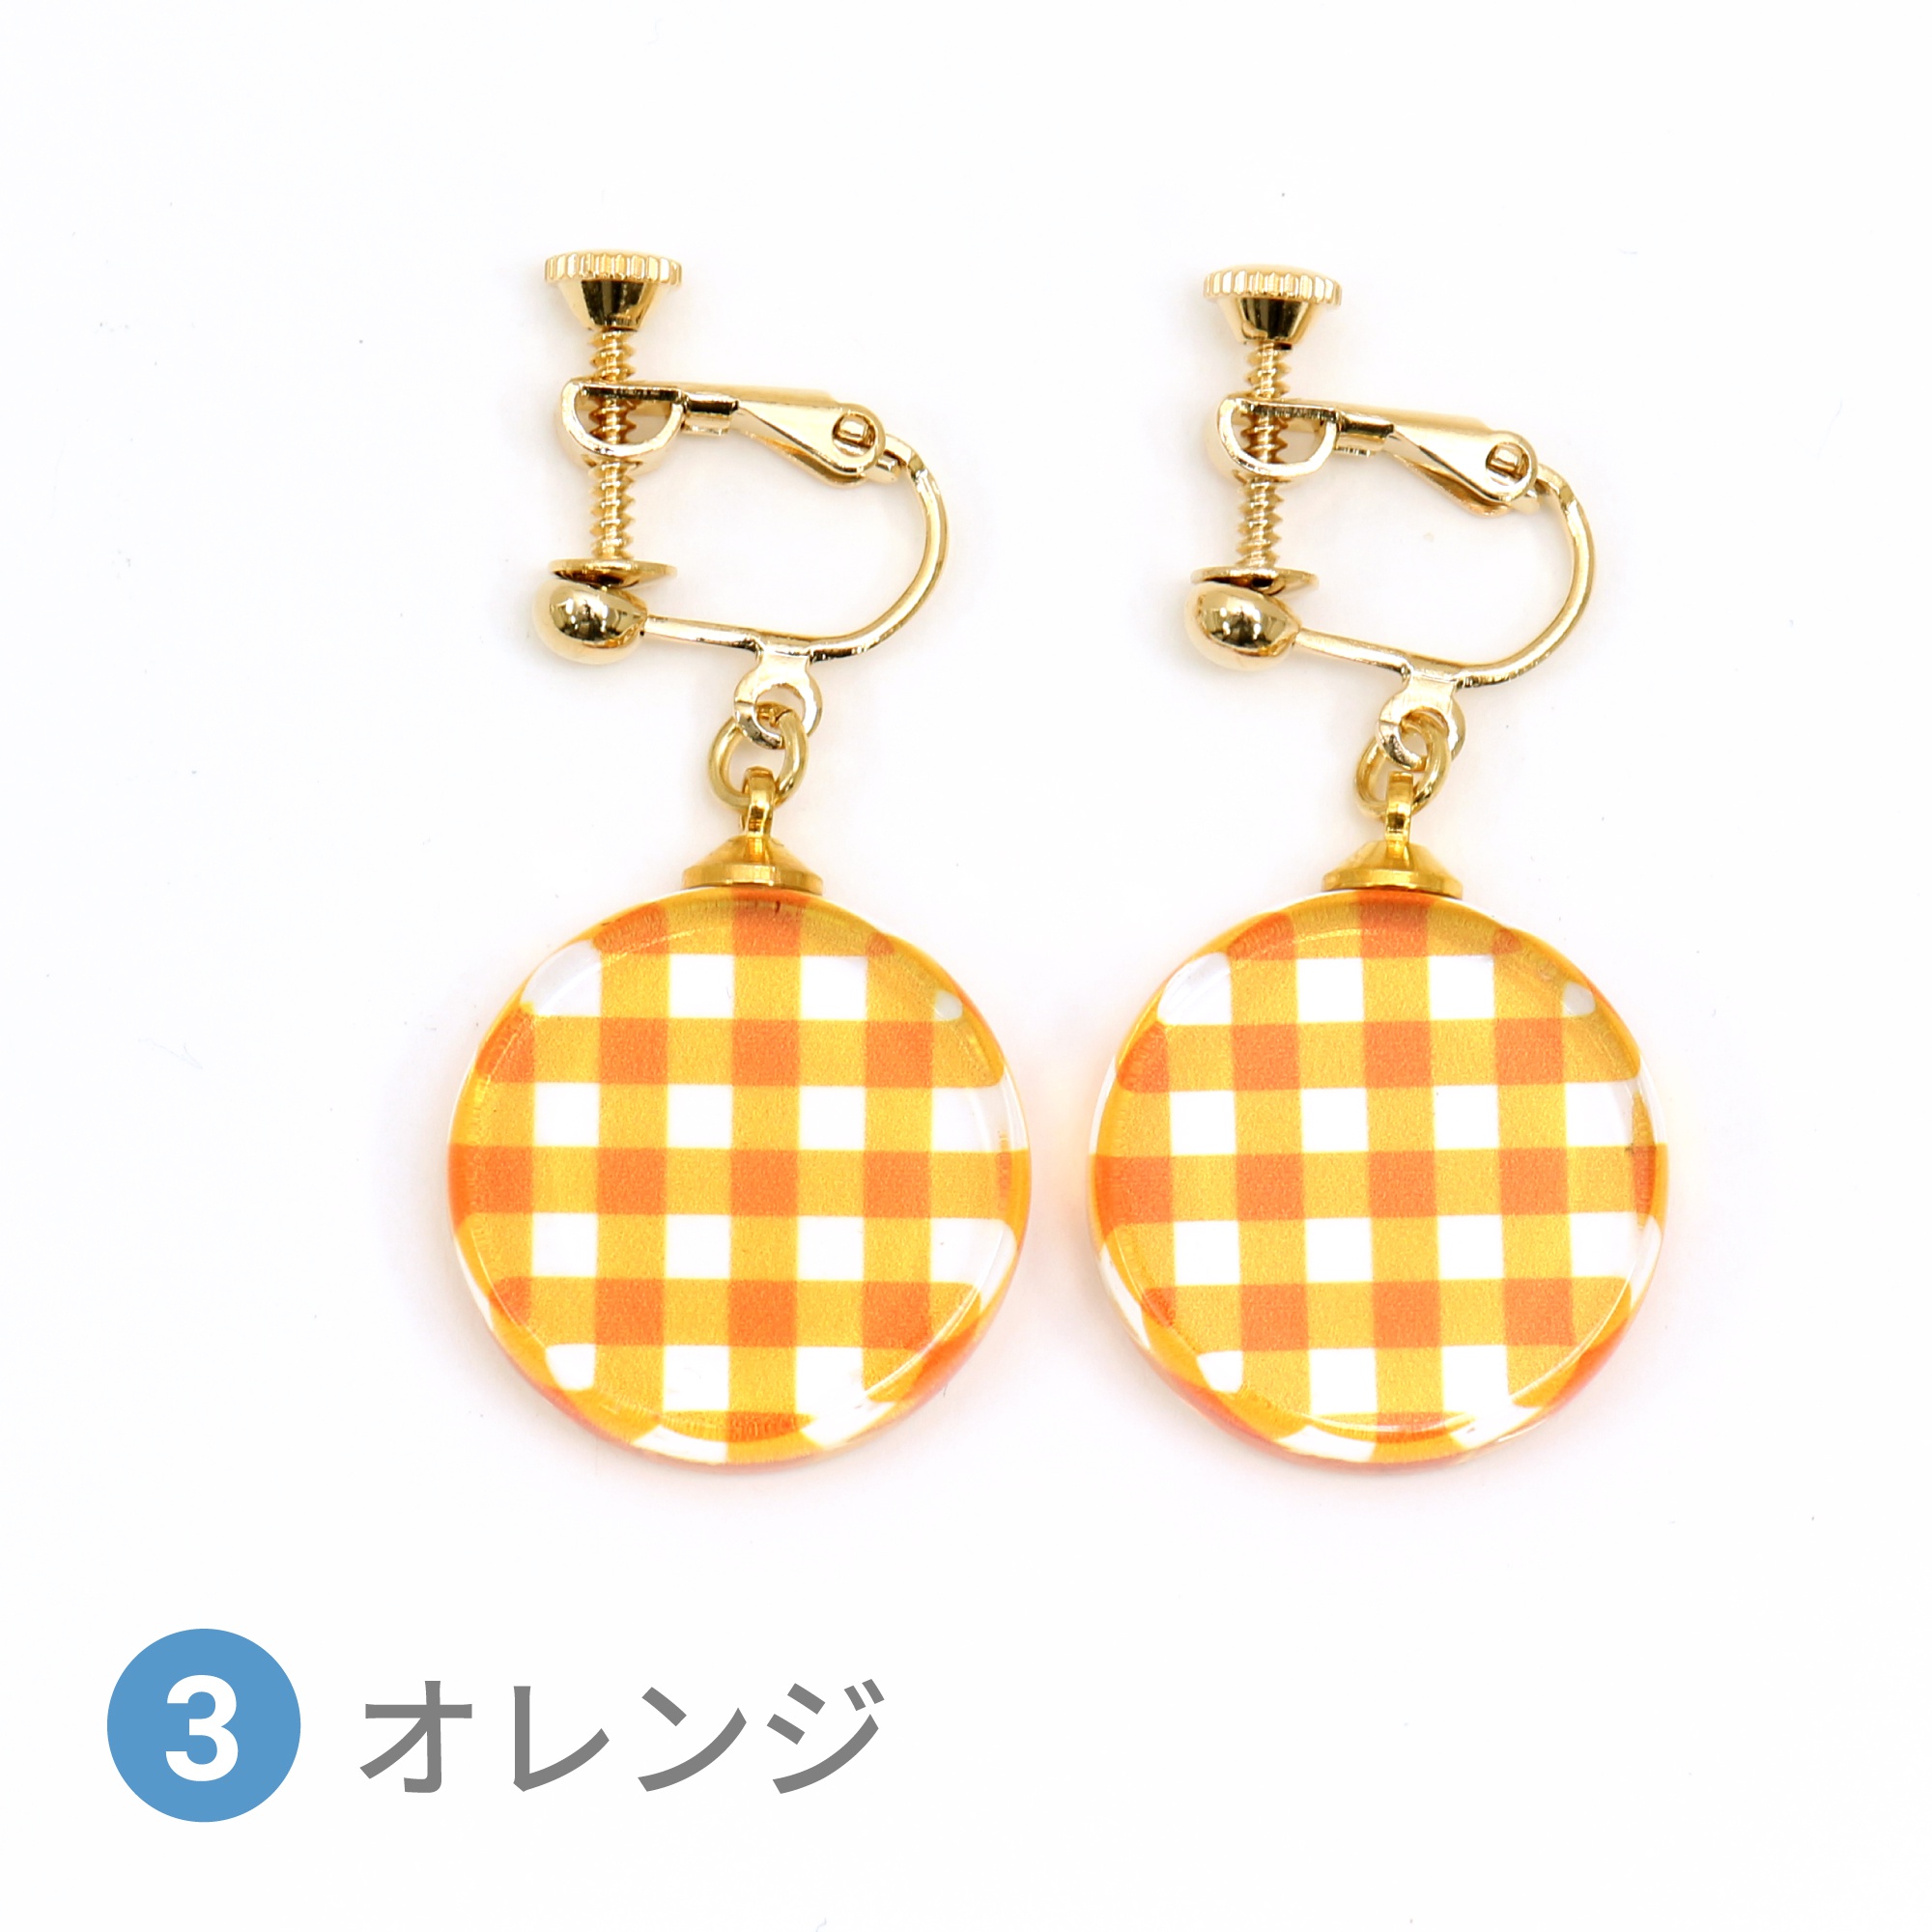 Glass accessories Earring GINGHAM CHECK orange round shape